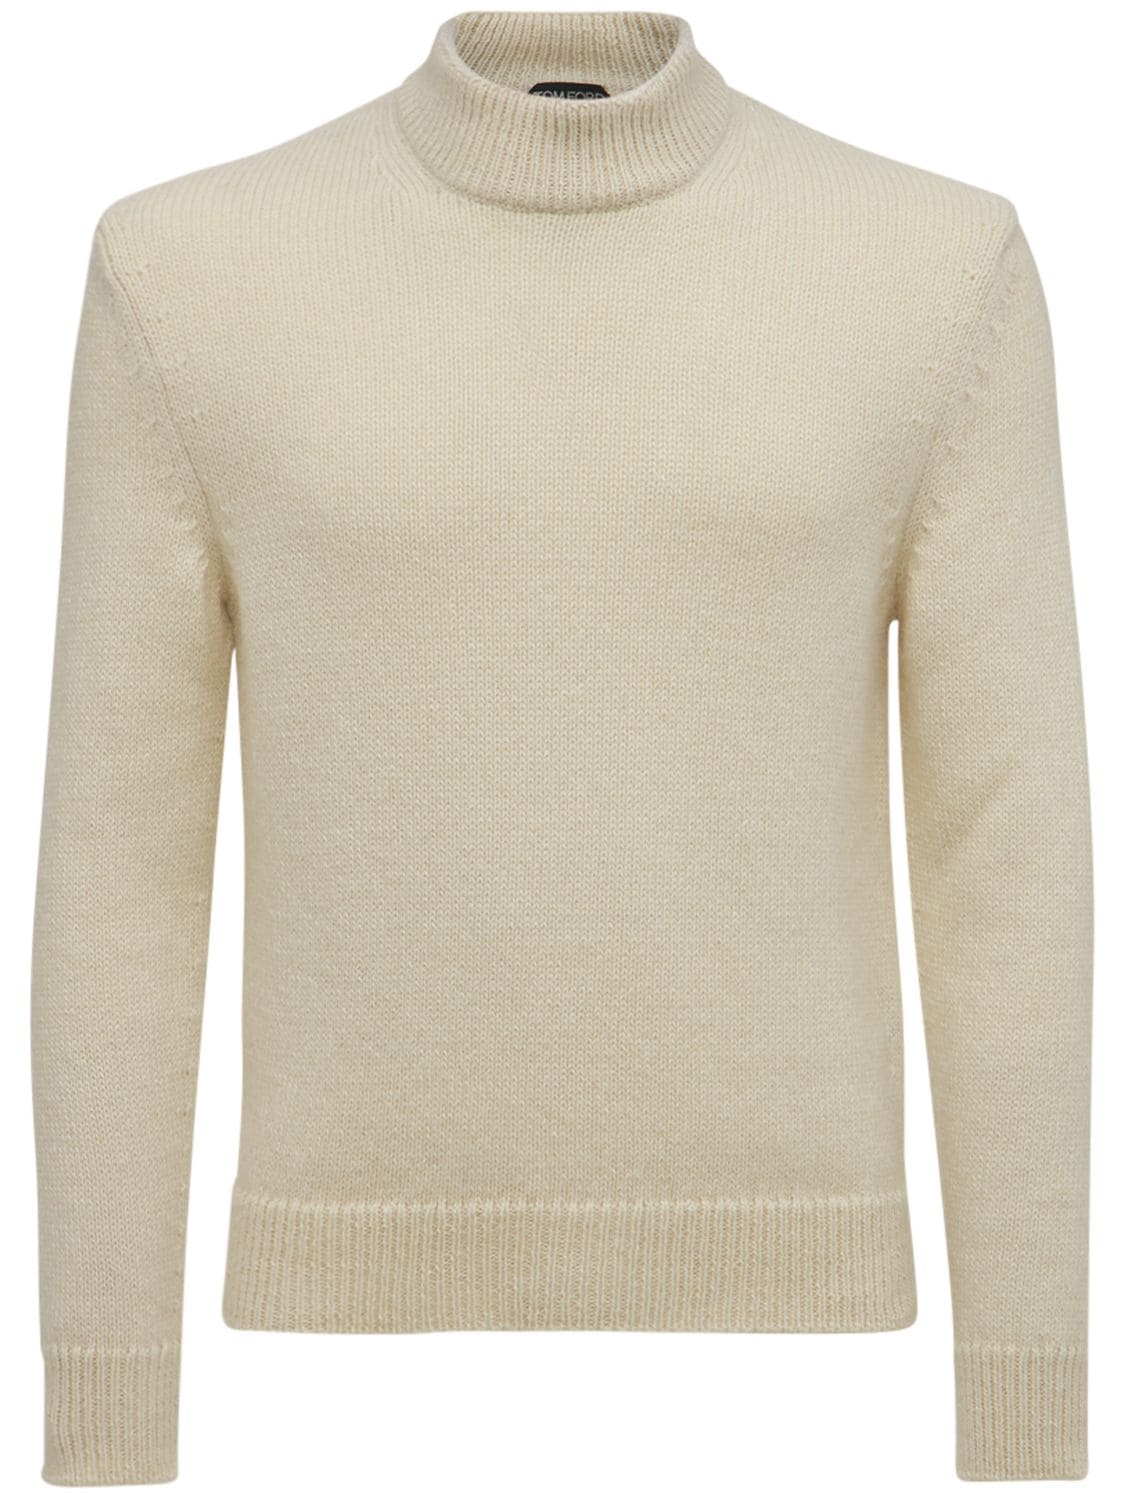 Tom Ford Brushed Cashmere & Wool Knit Sweater In Ivory | ModeSens